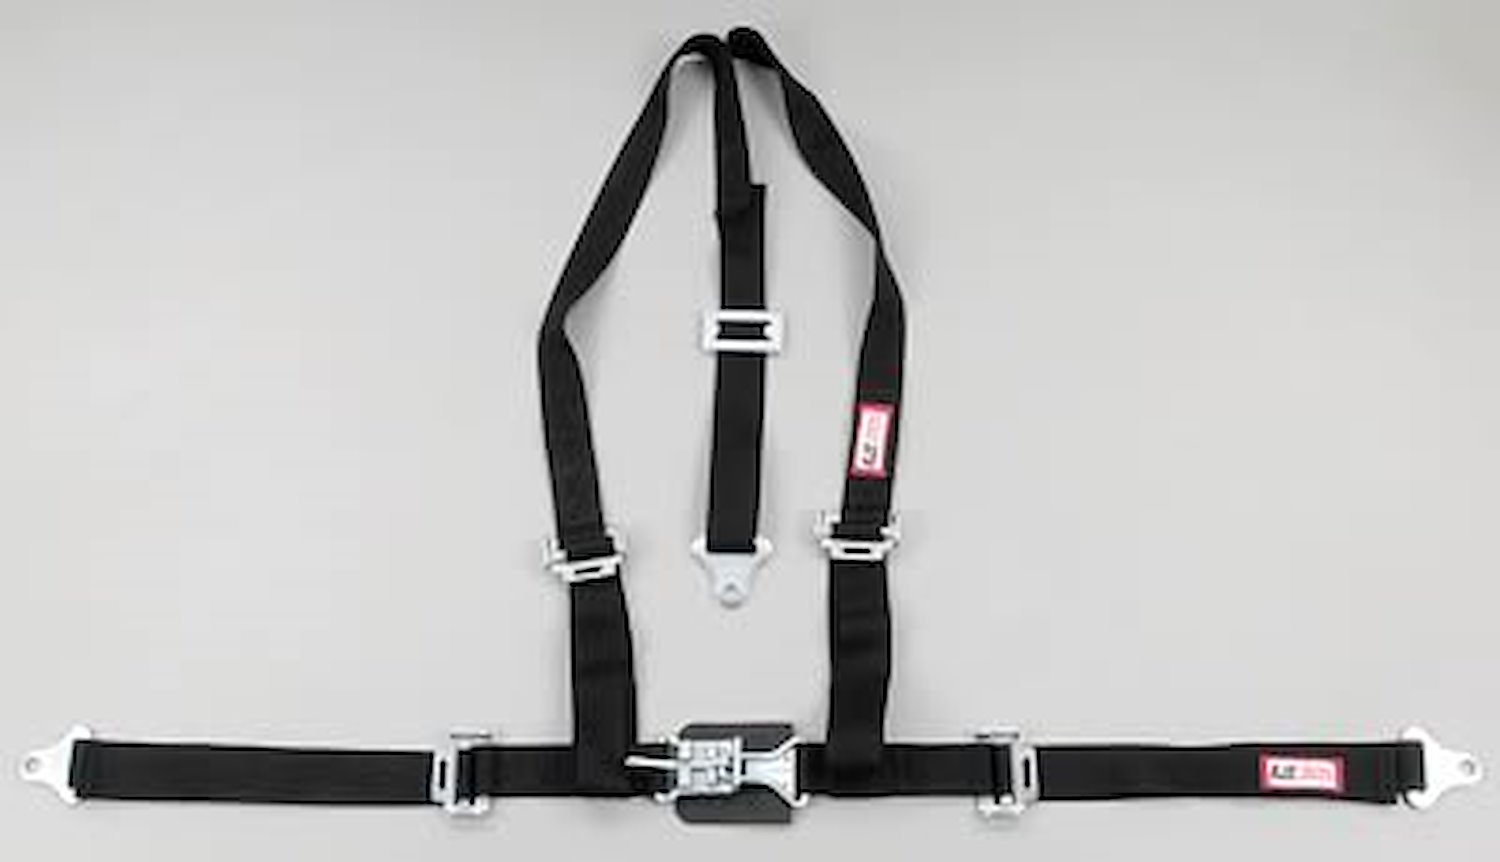 NON-SFI L&L HARNESS 2 PULL DOWN Lap Belt SNAP SEWN IN 2 S.H. Y FLOOR Mount WRAP/BOLT YELLOW